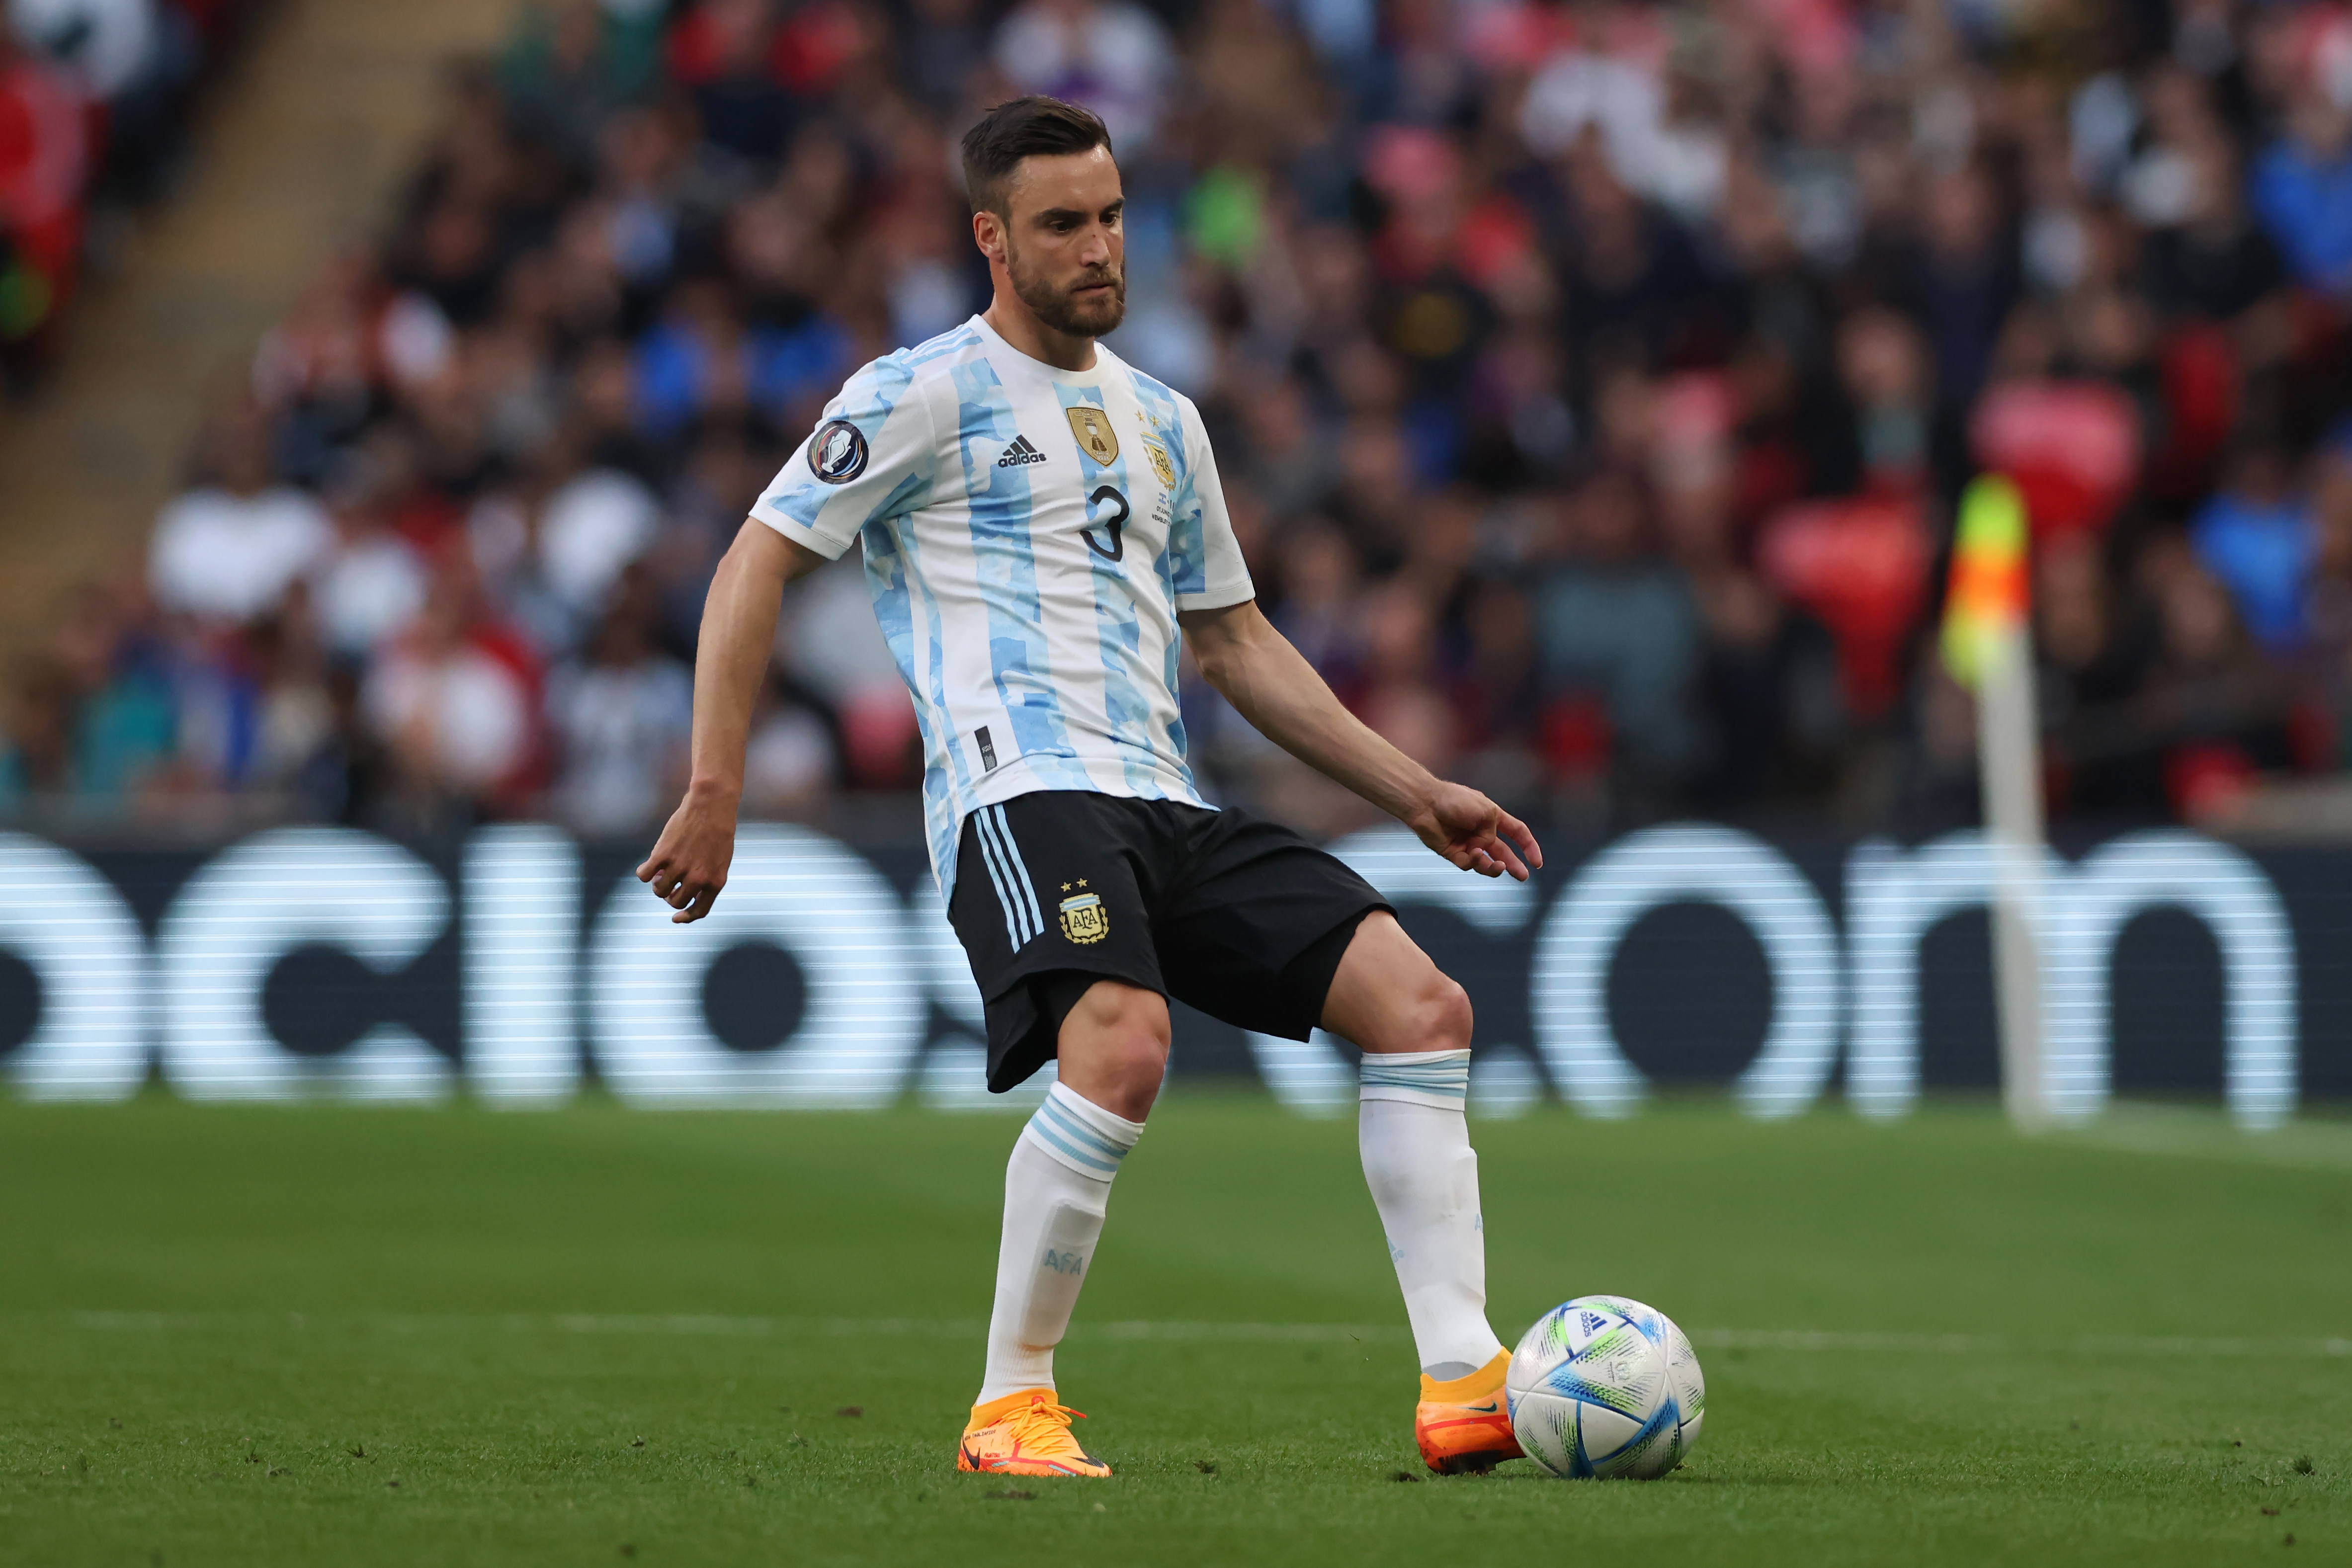 LONDON, ENGLAND - JUNE 01: Nicolas Tagliafico of Argentina during the match between Italy and Argentina at Wembley Stadium on June 01, 2022 in London, England.  (Photo by Jonathan Moscrop/Getty Images)